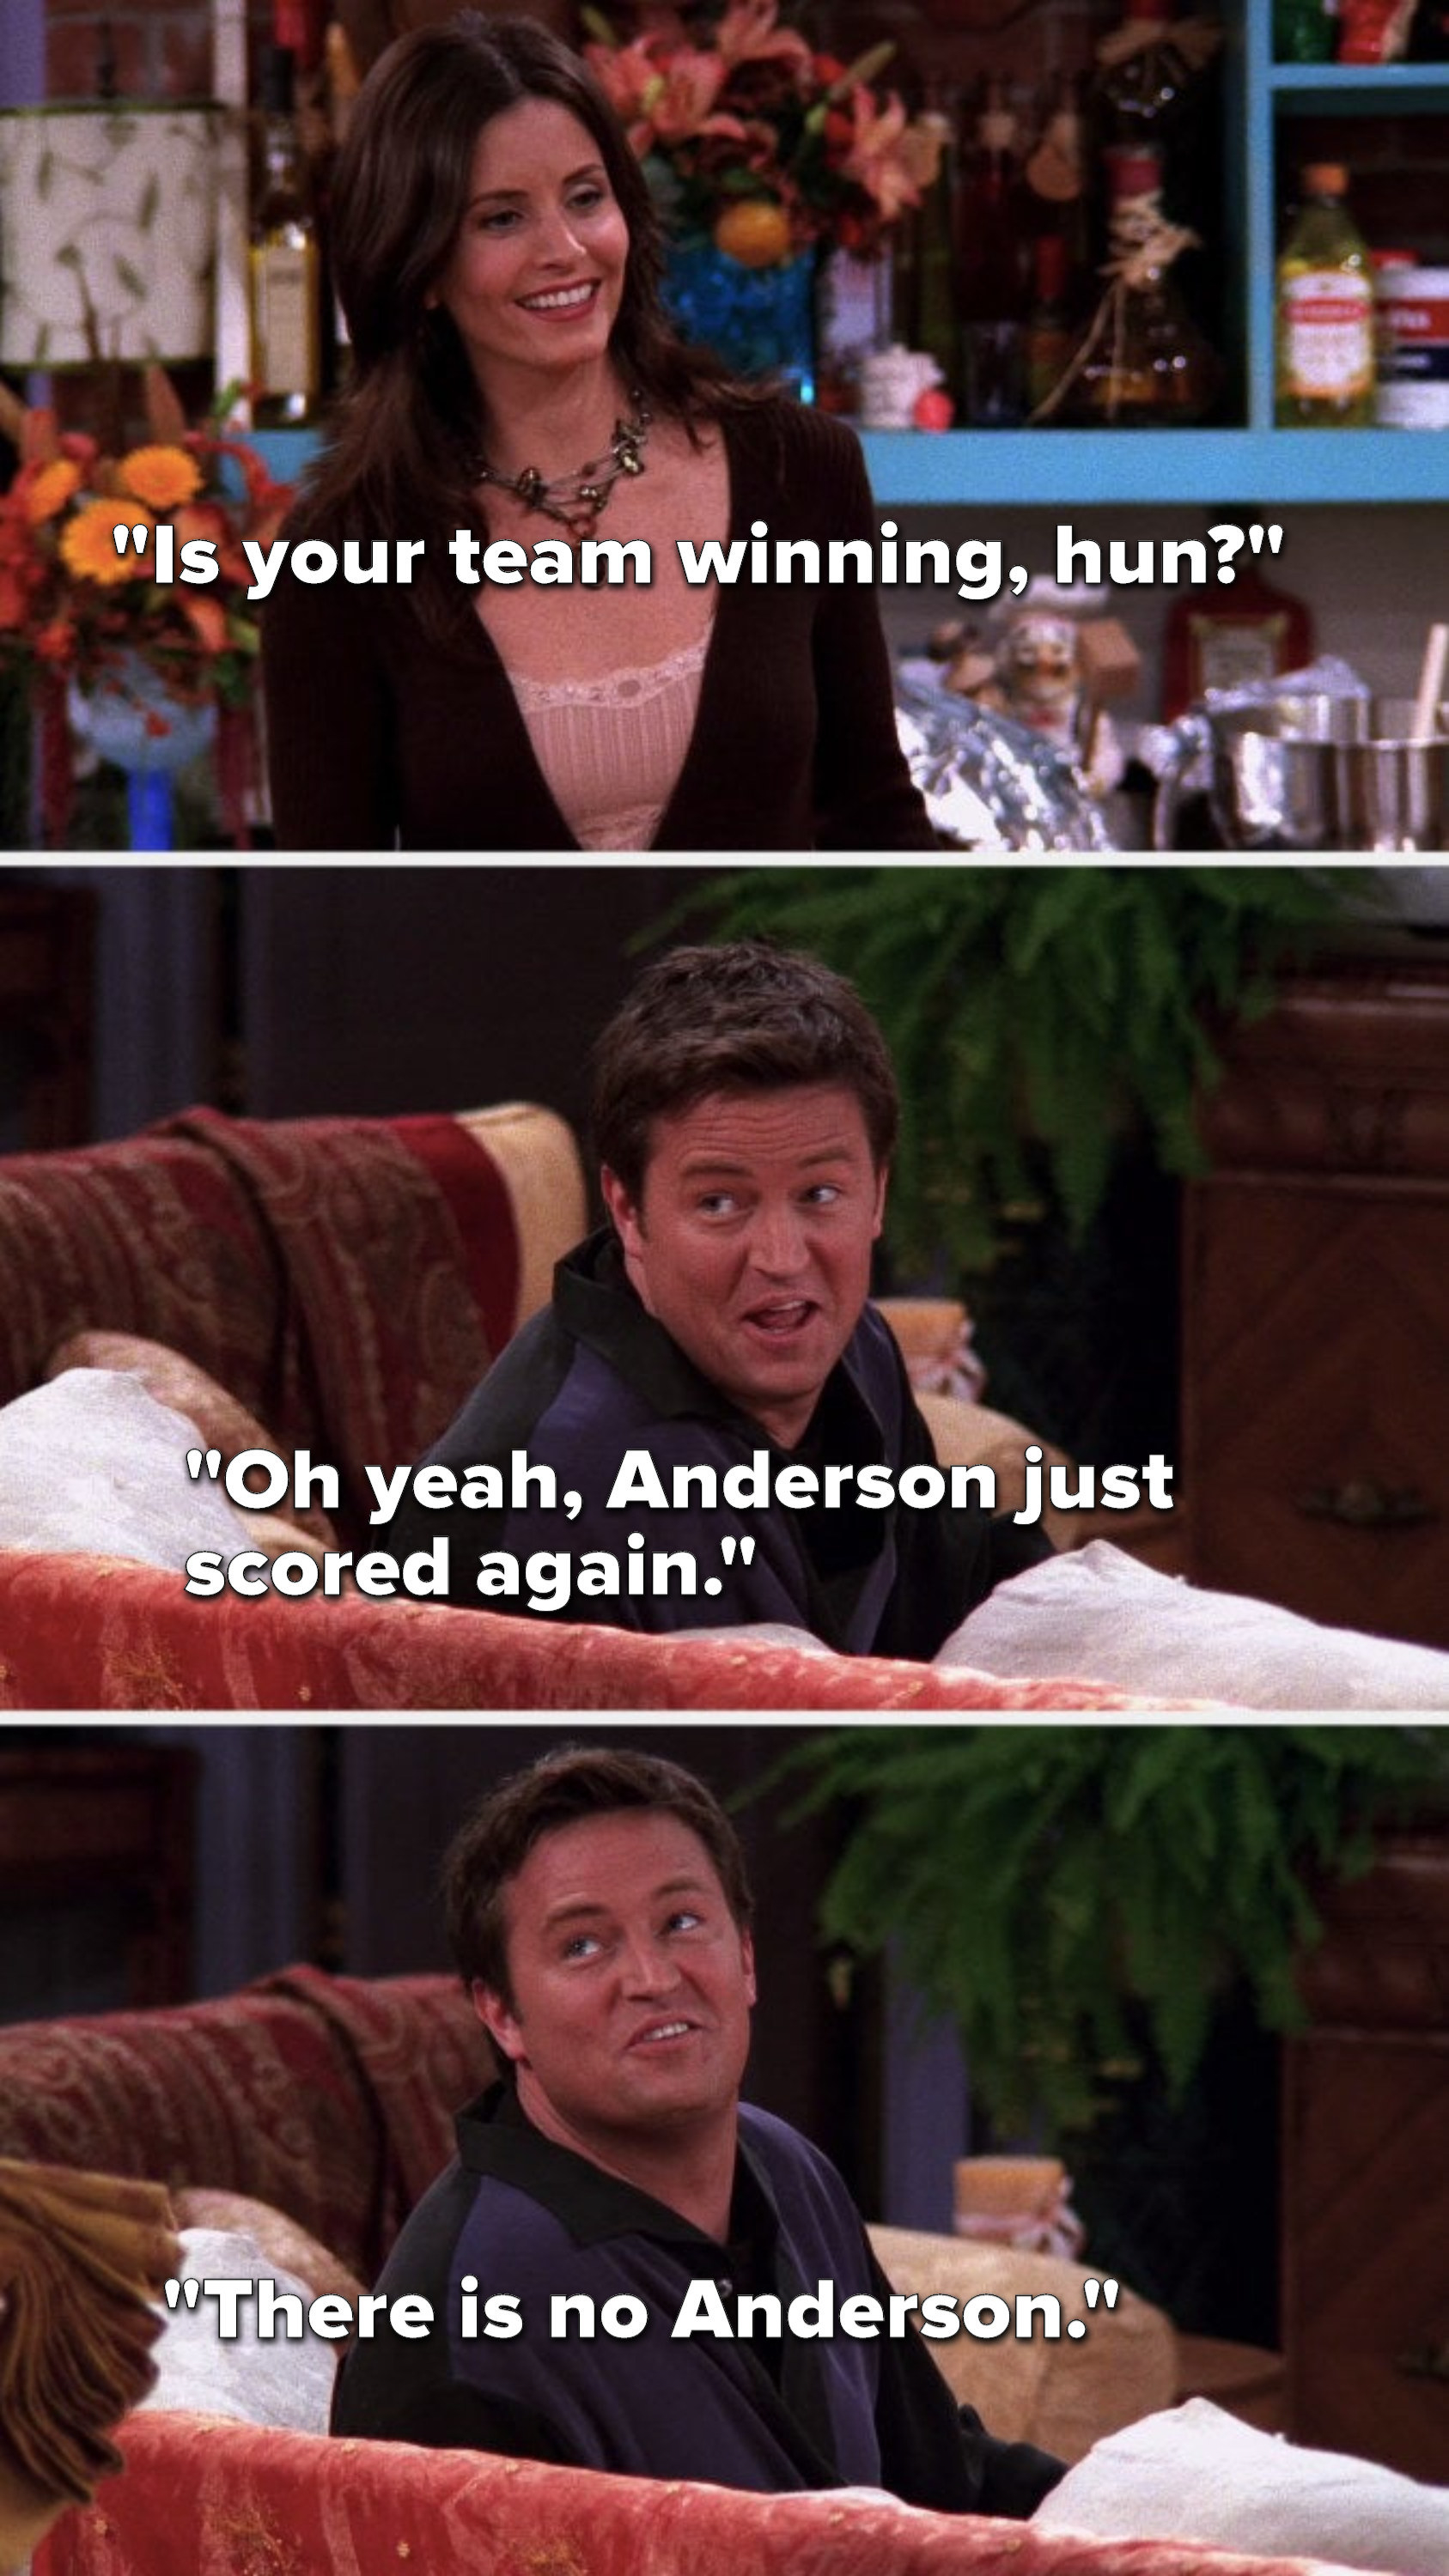 Monica asks, &quot;Is your team winning, hun,&quot; Chandler says, &quot;Oh yeah, Anderson just scored again,&quot; but then he says to Phoebe, &quot;There is no Anderson&quot;